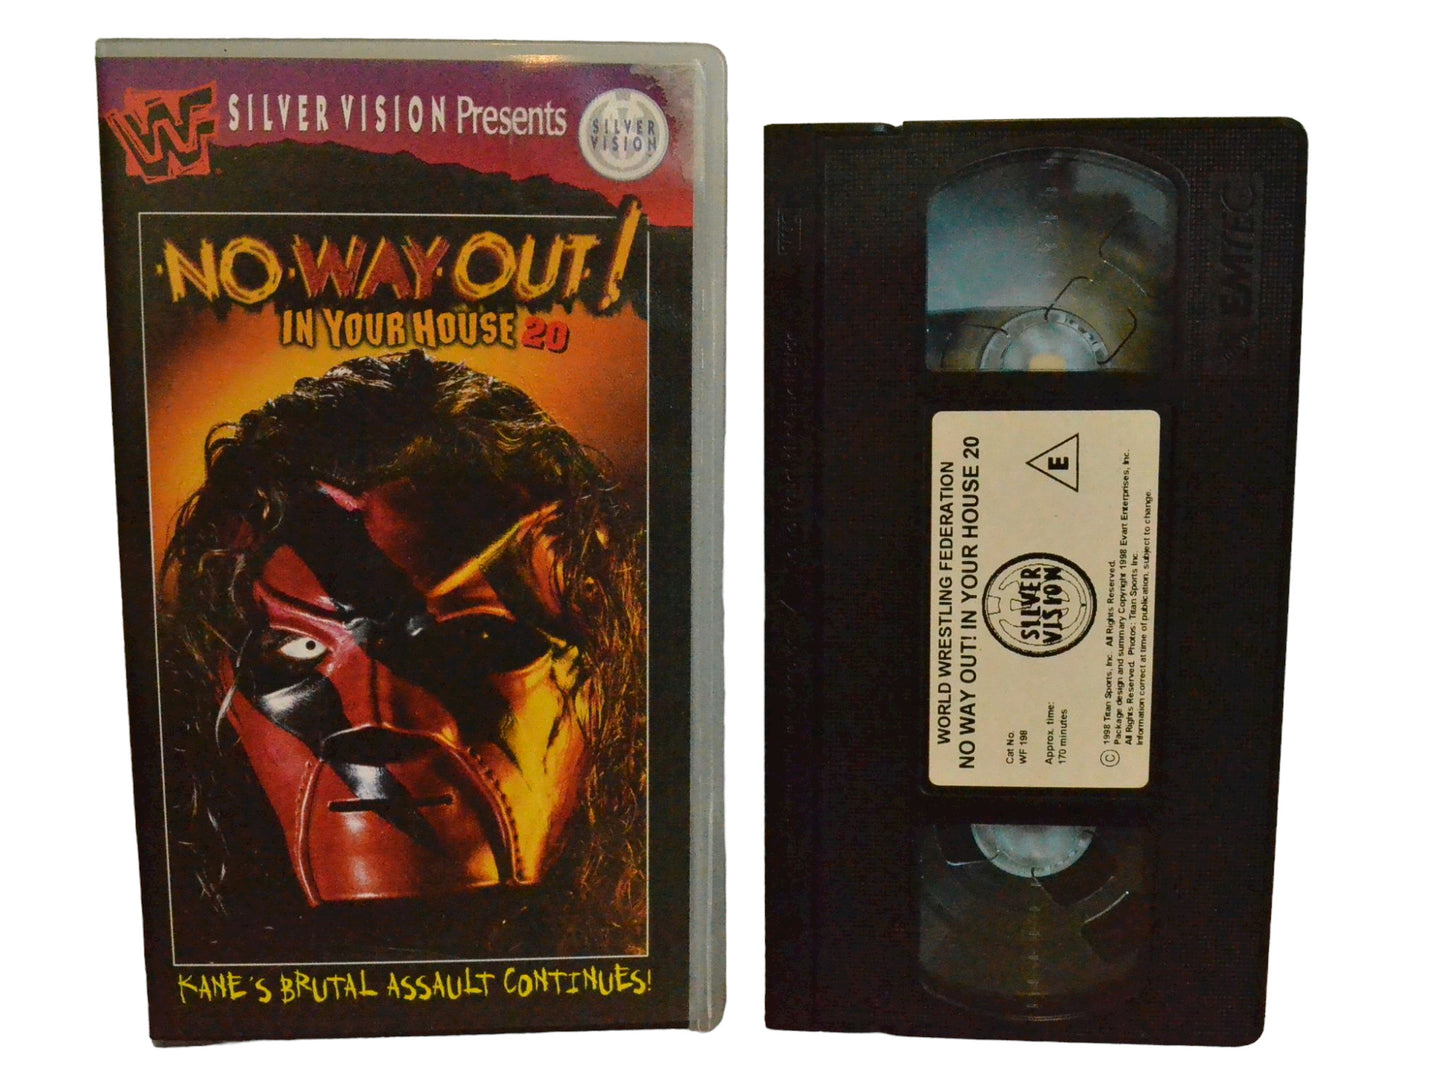 WWF: No Way Out! In Your House 20 - Steve Austin - World Wrestling Federation Home Video - Wrestling - PAL - VHS-